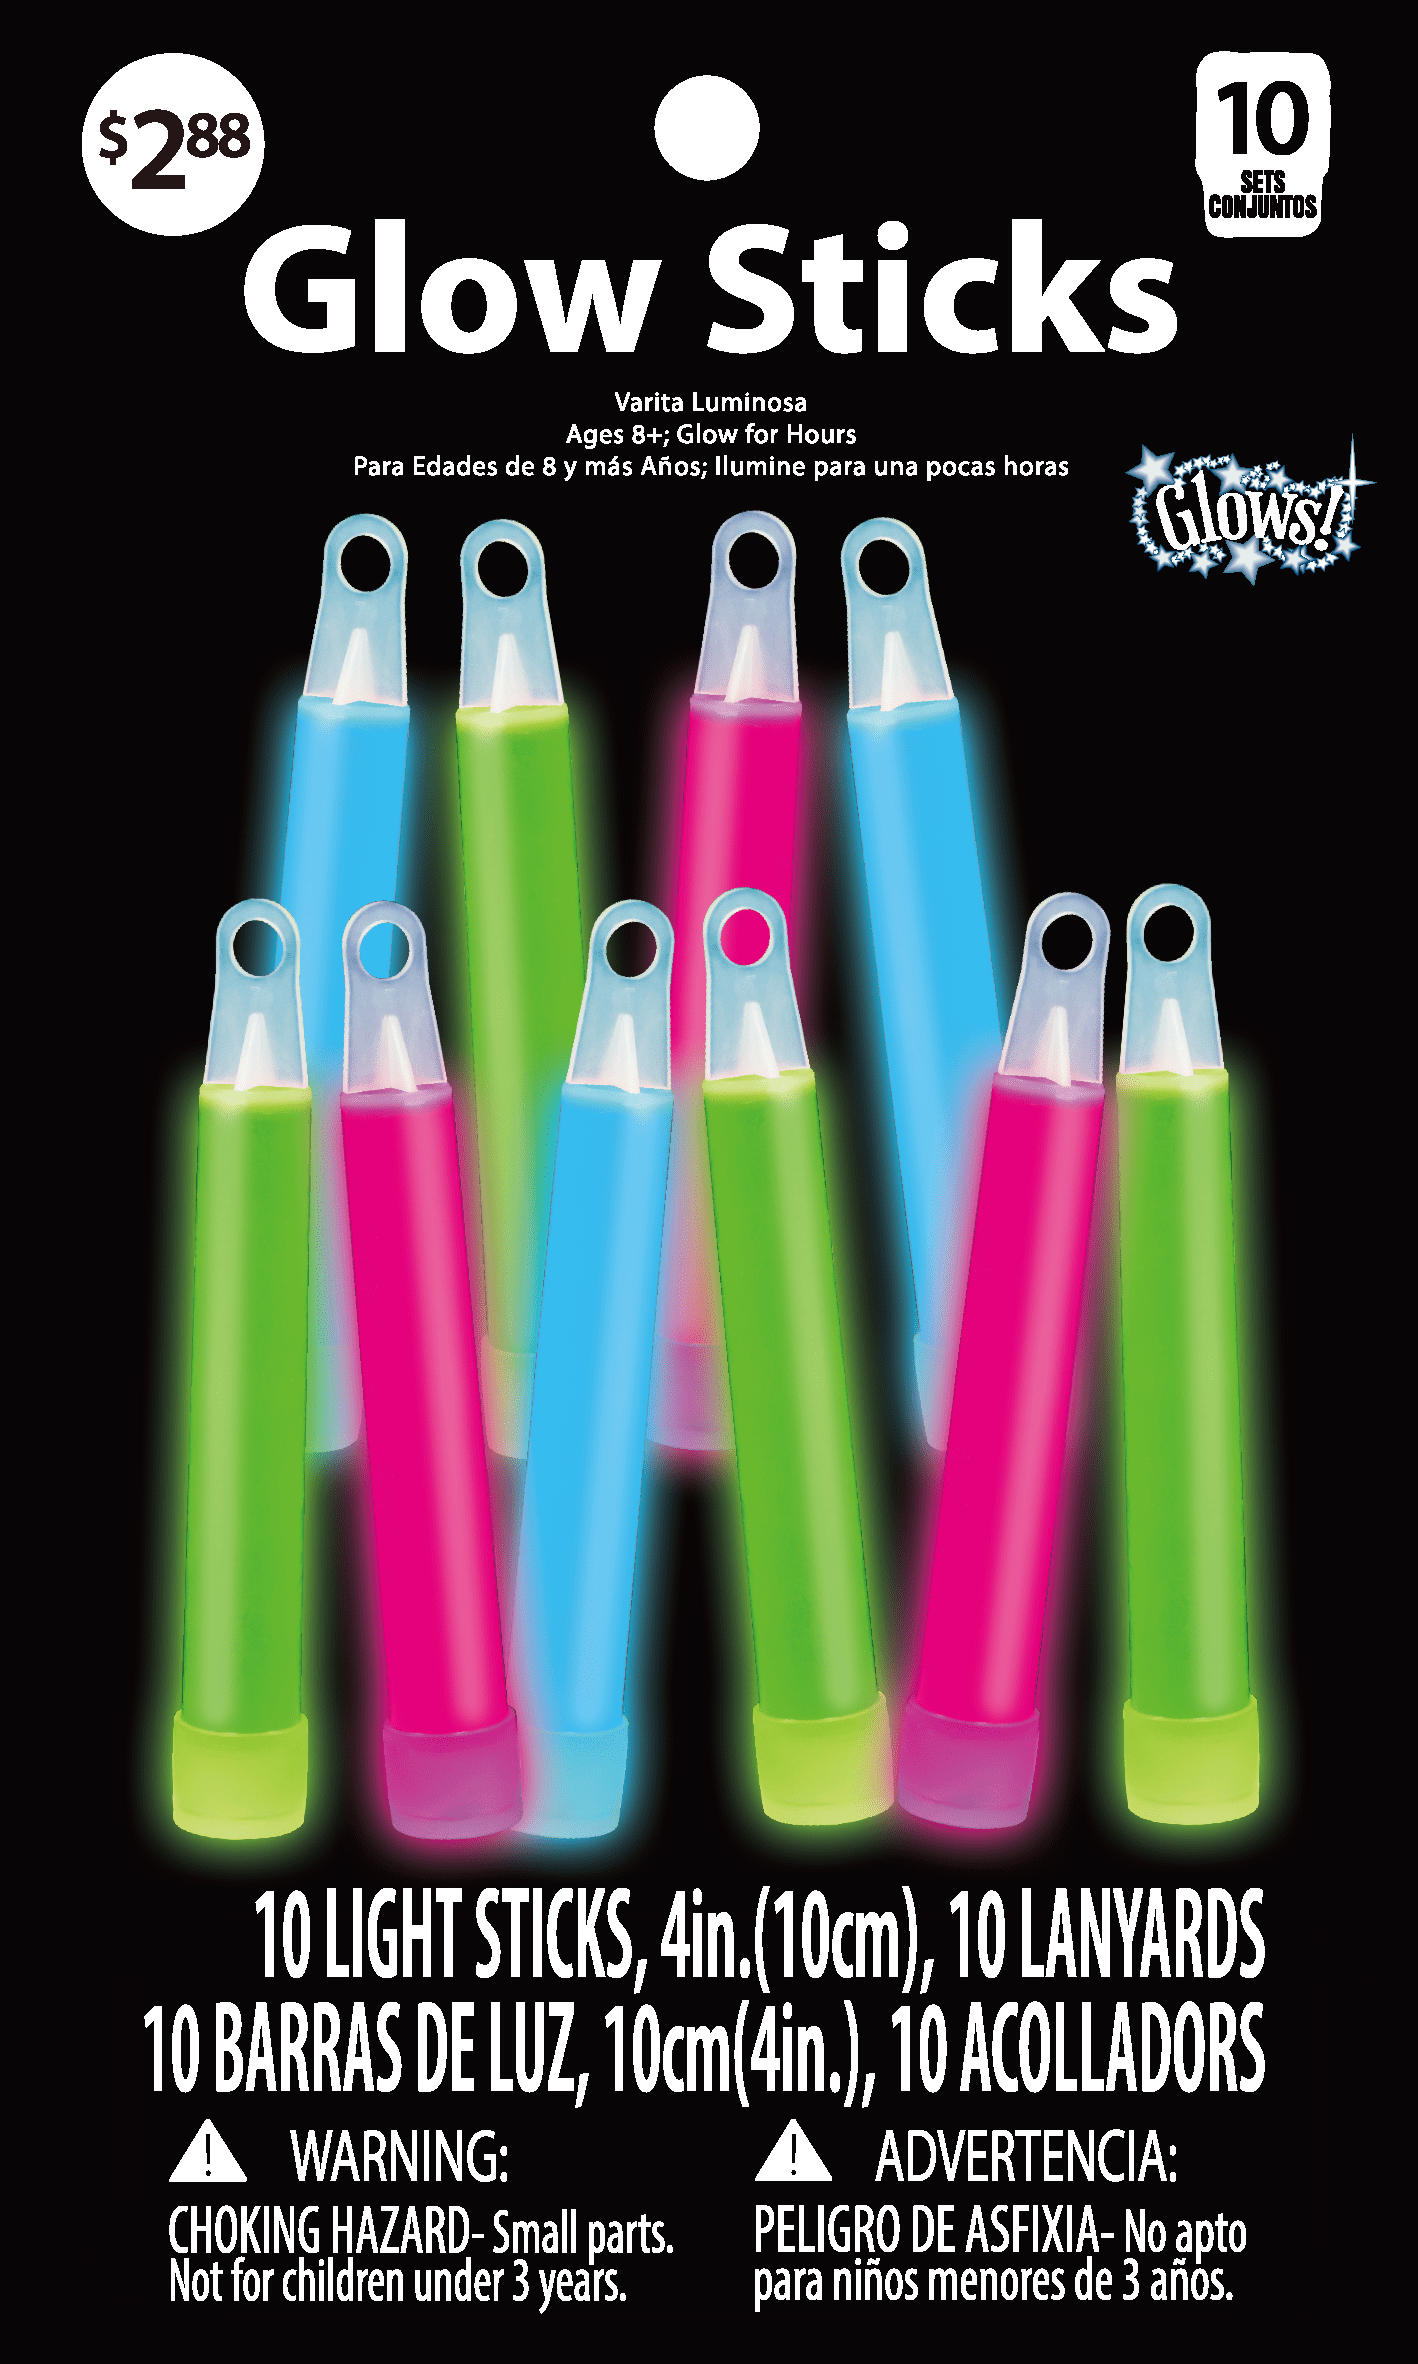 Multi-color LED Glow Sticks Batons - Glow In The Dark Store